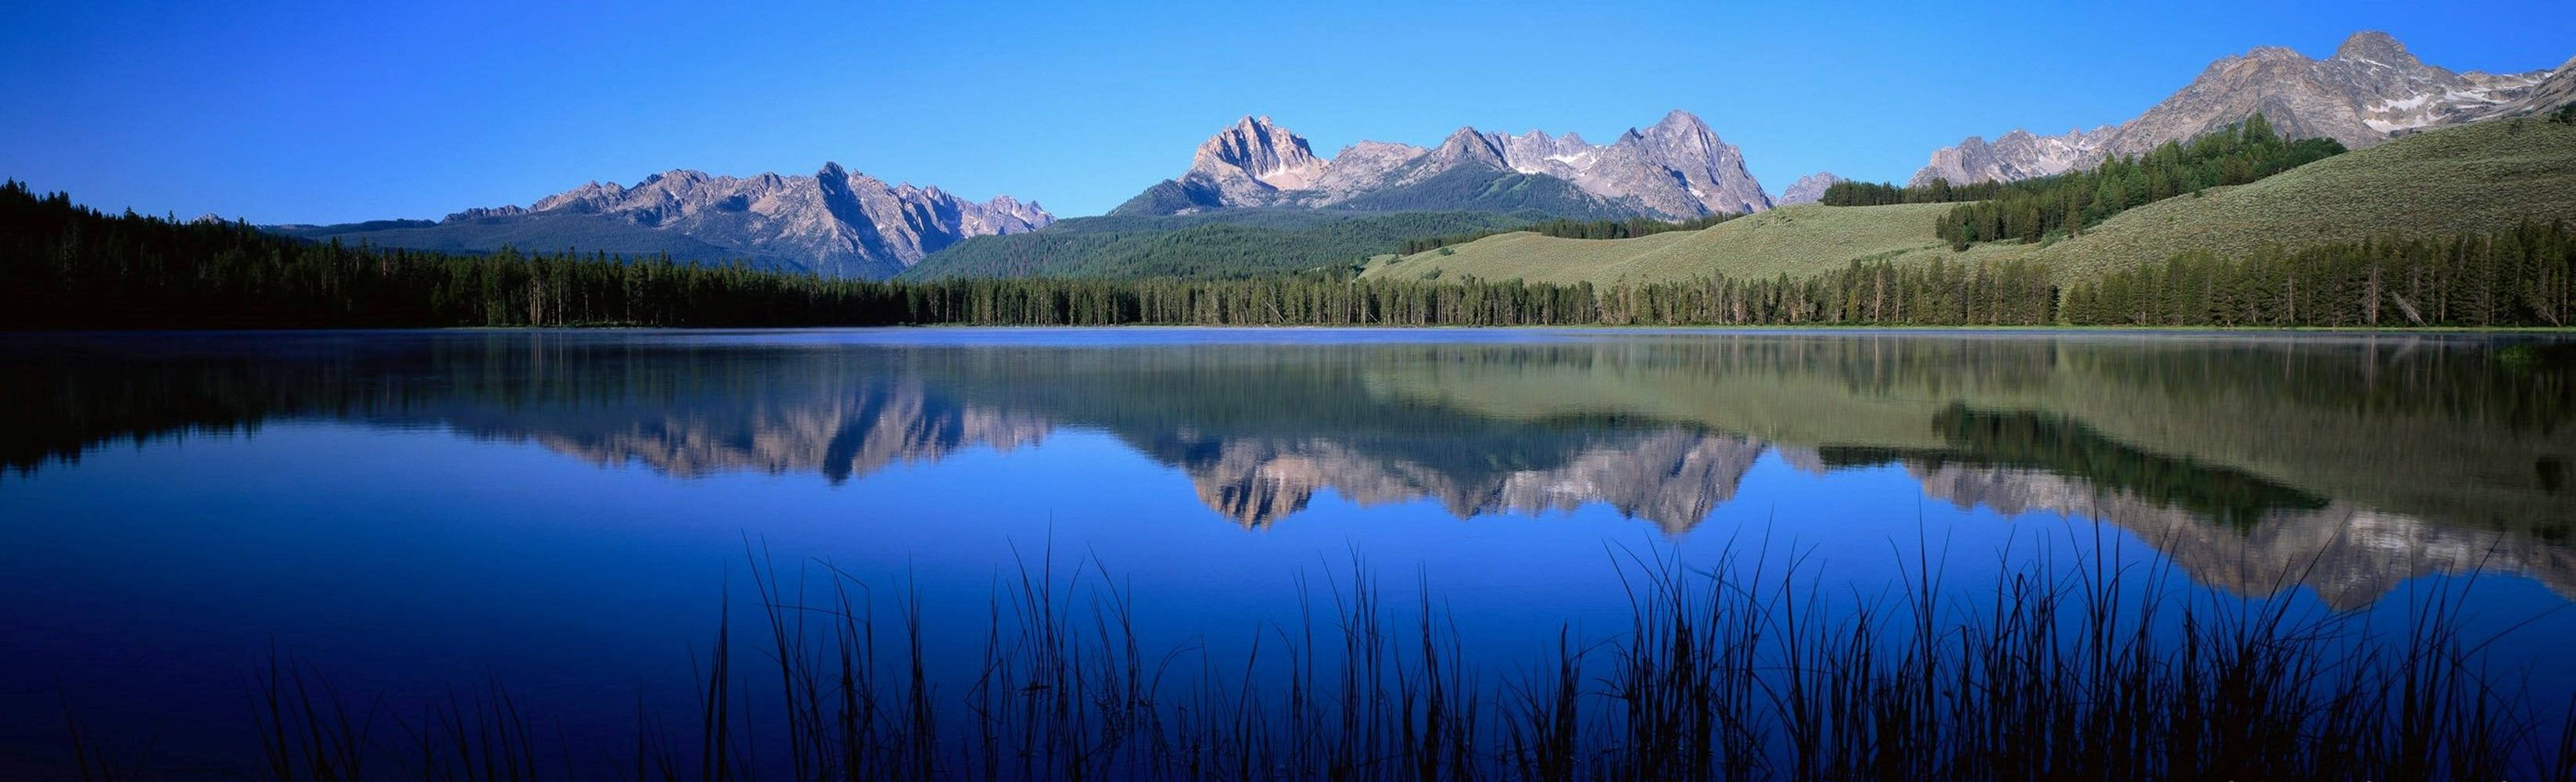 Idaho Little Red Fish Lake For Monitor Wallpaper